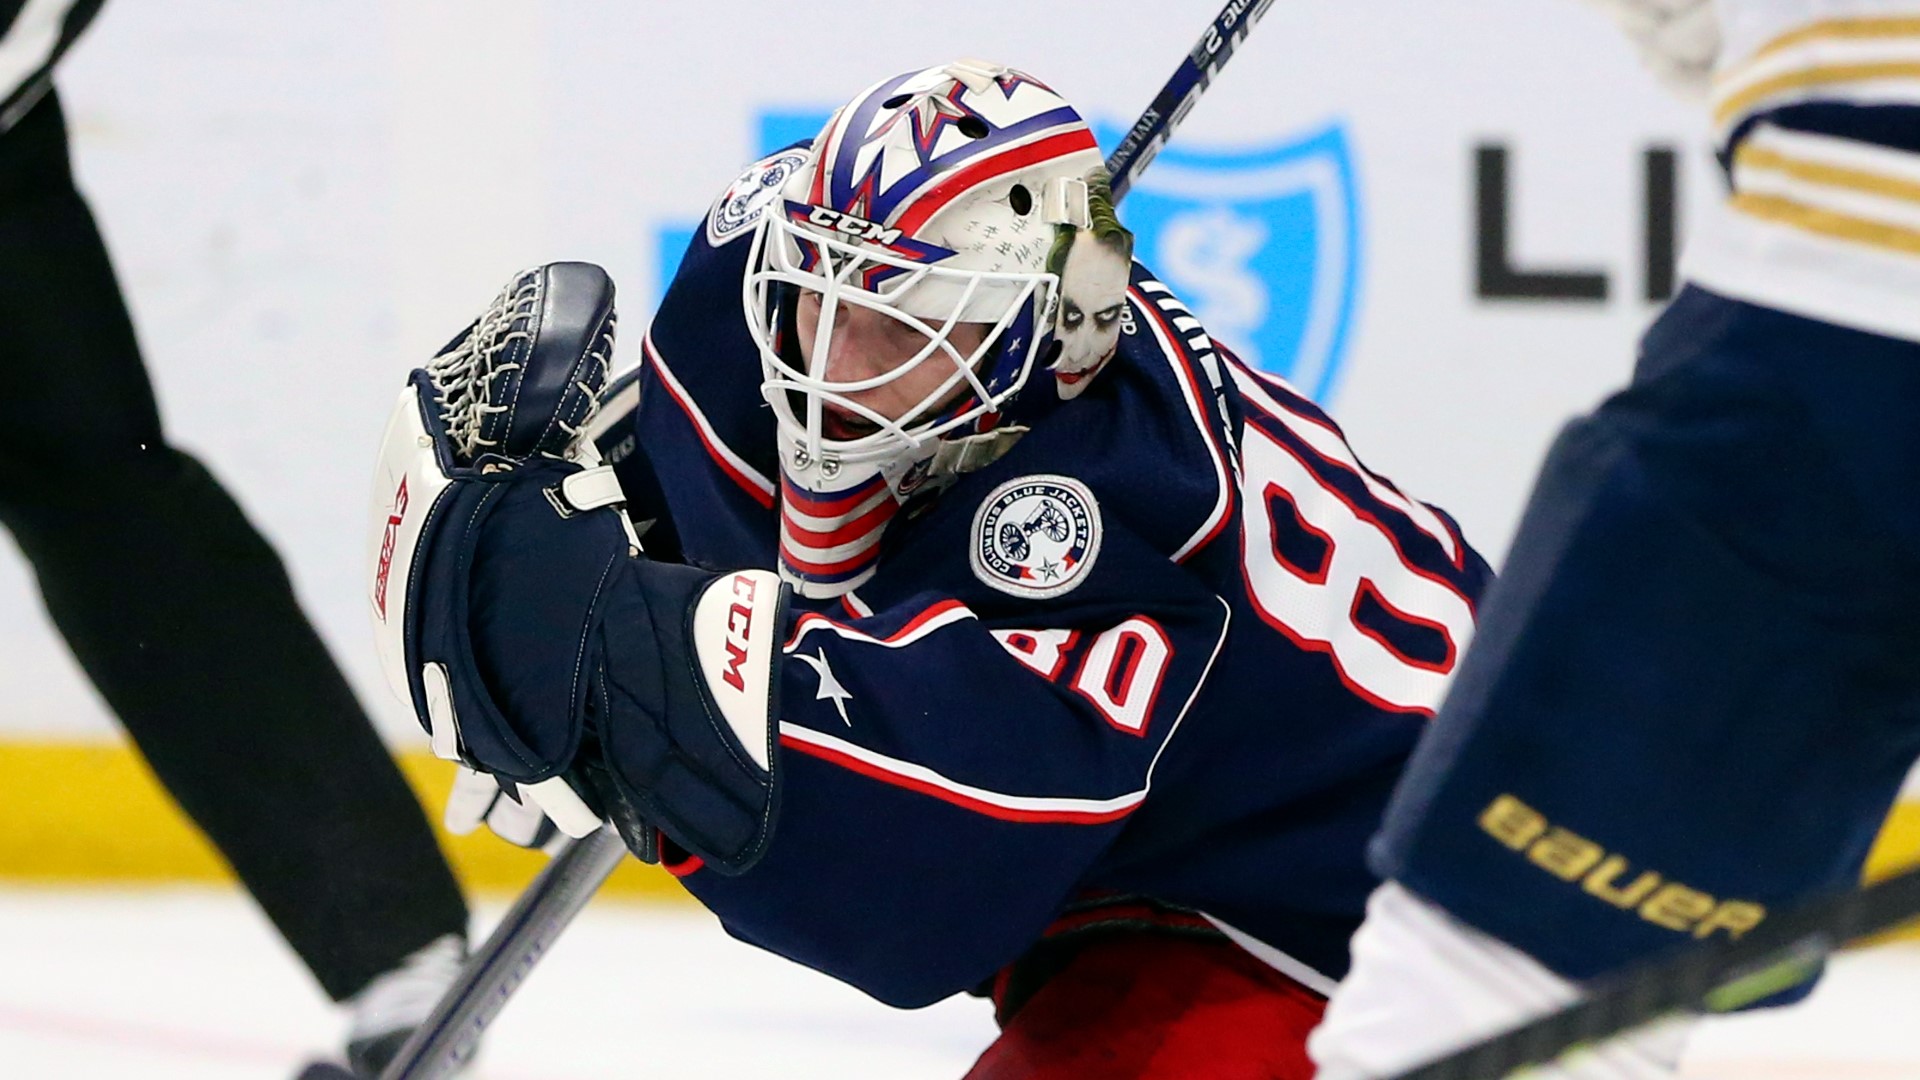 Friends and family hailed Columbus Blue Jackets’ goalie Matiss Kivlenieks a hero during a service in his honor.